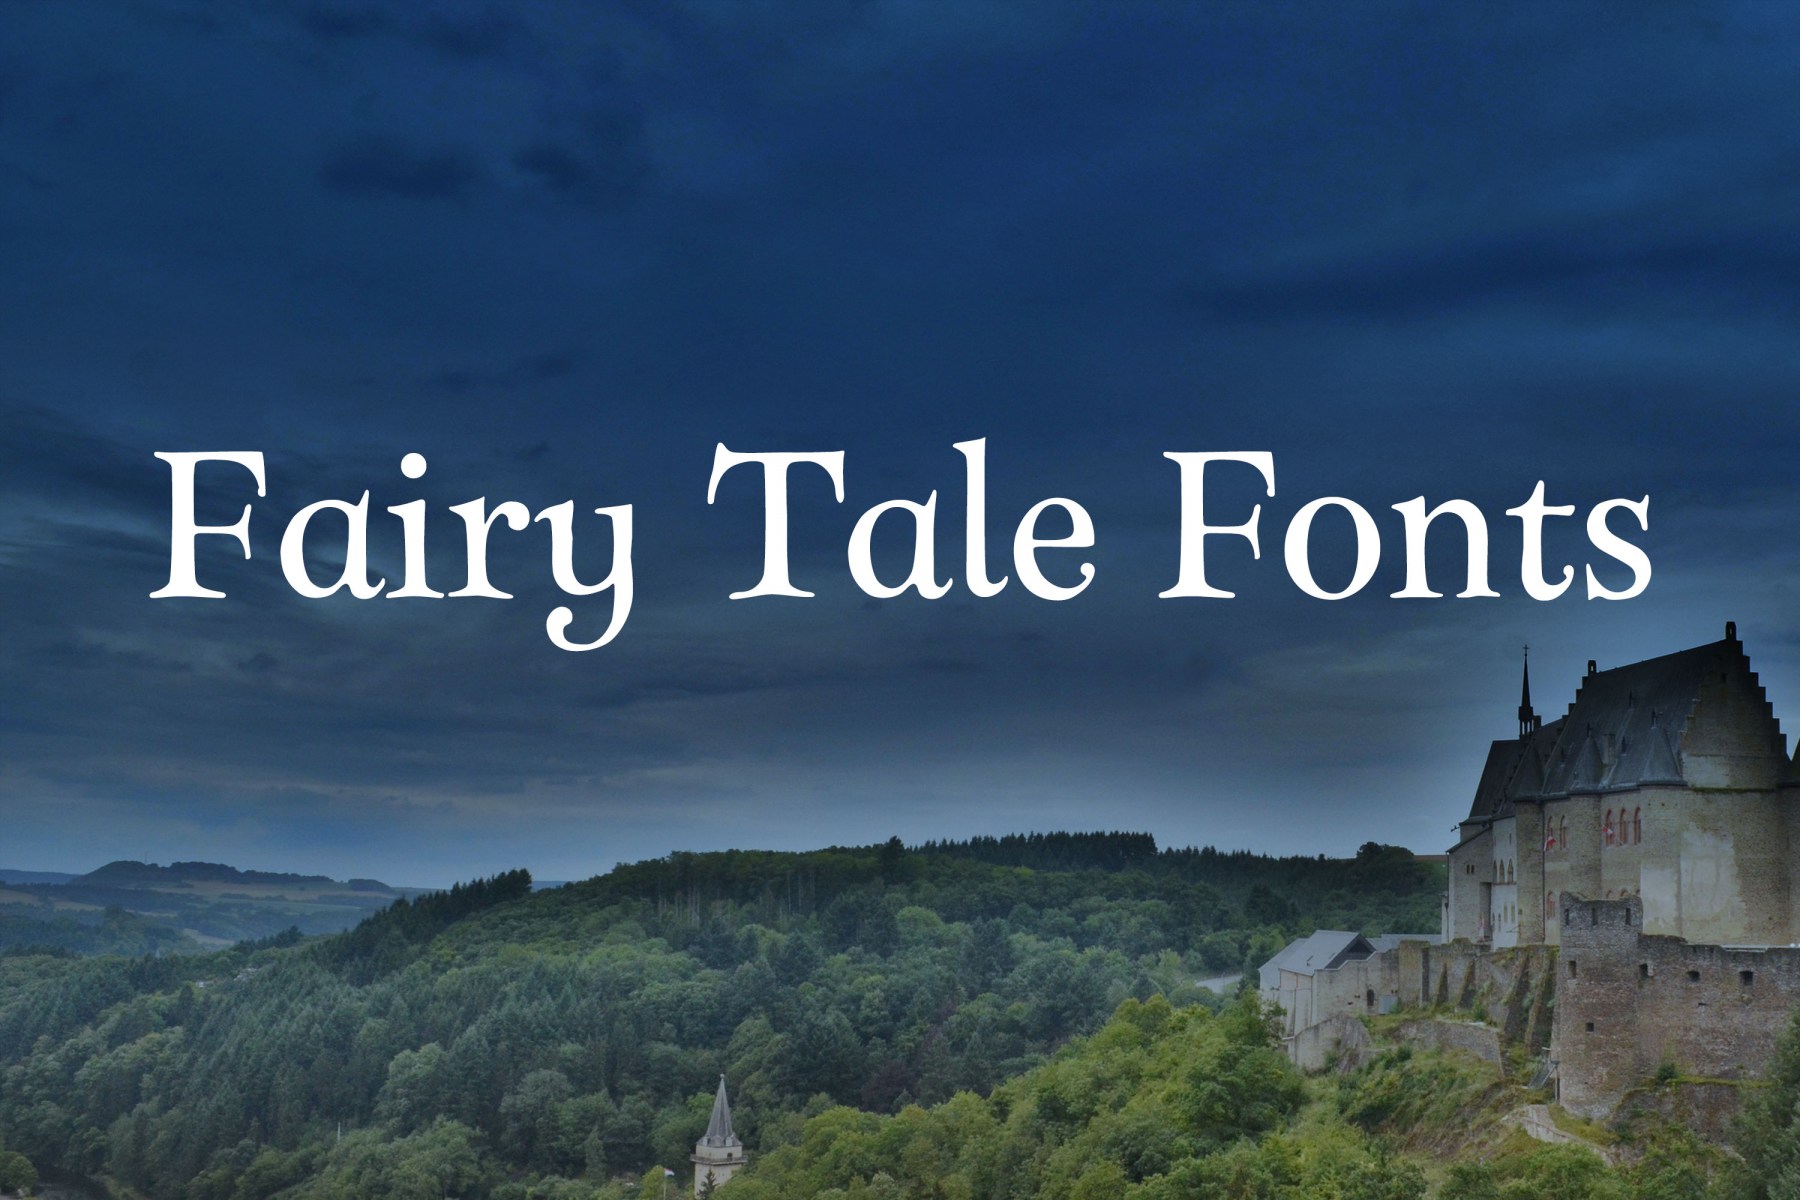 More information about "Fairy Tale Fonts"